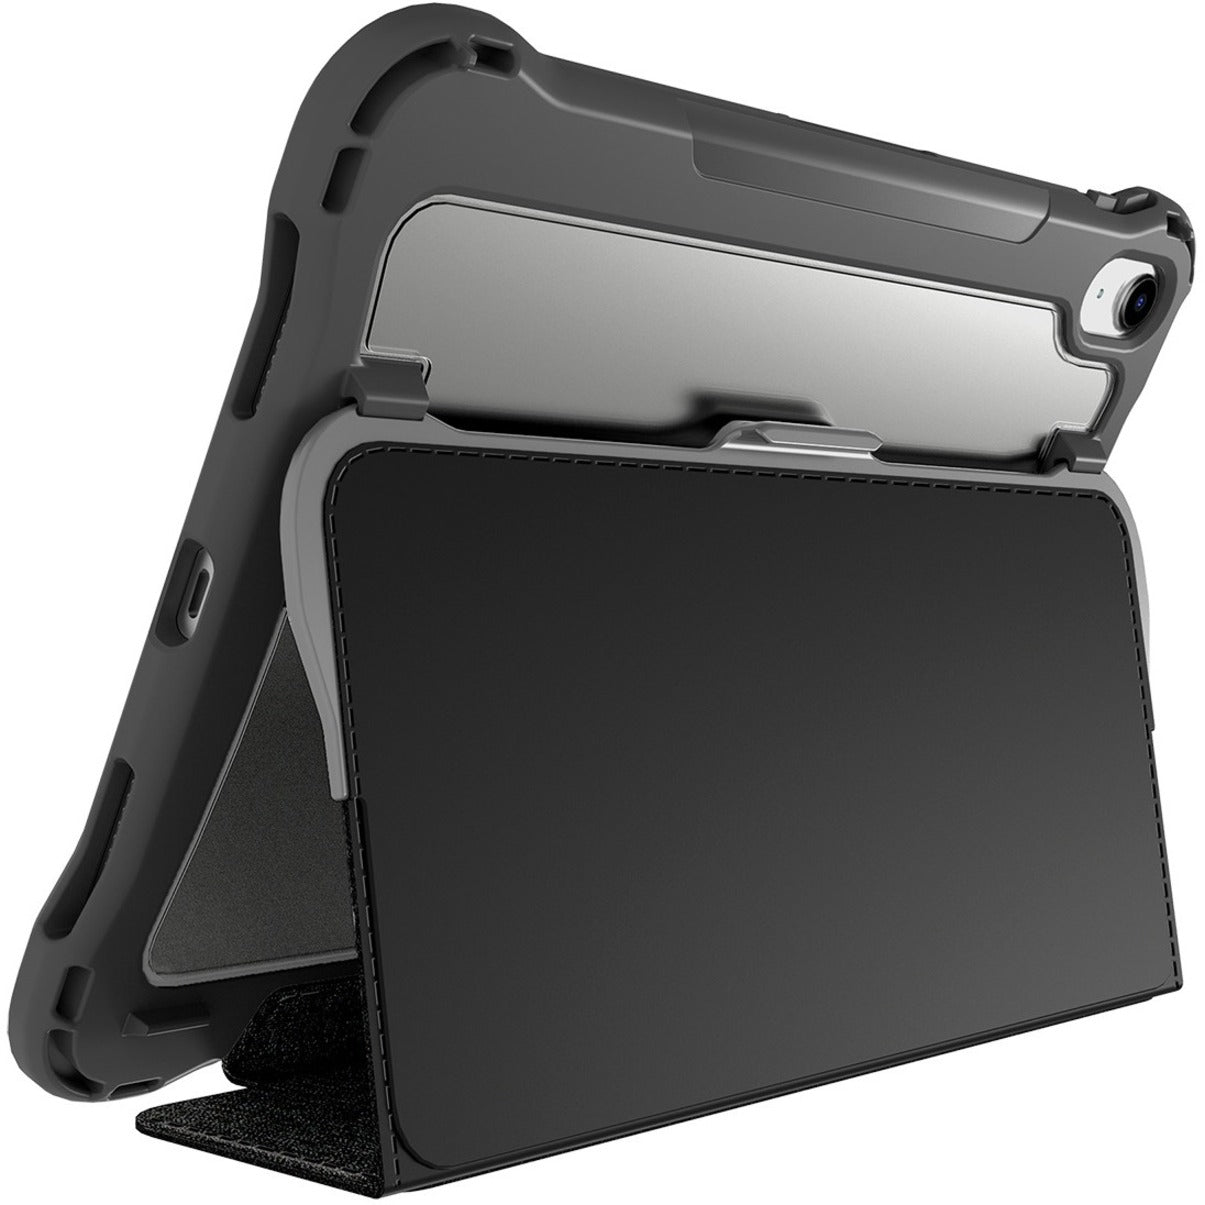 Brenthaven EDGE FOLIO FOR IPAD 10TH GEN. DROP TESTED TO PROTECT AGAINST FALLS FROM UP TO SIX FEET, EXCEEDING MILITARY STANDARD MIL-STD-810G. CRUMPLE ZONE CORNERS ABSORB AND DEFLECT IMPACT. (2281)